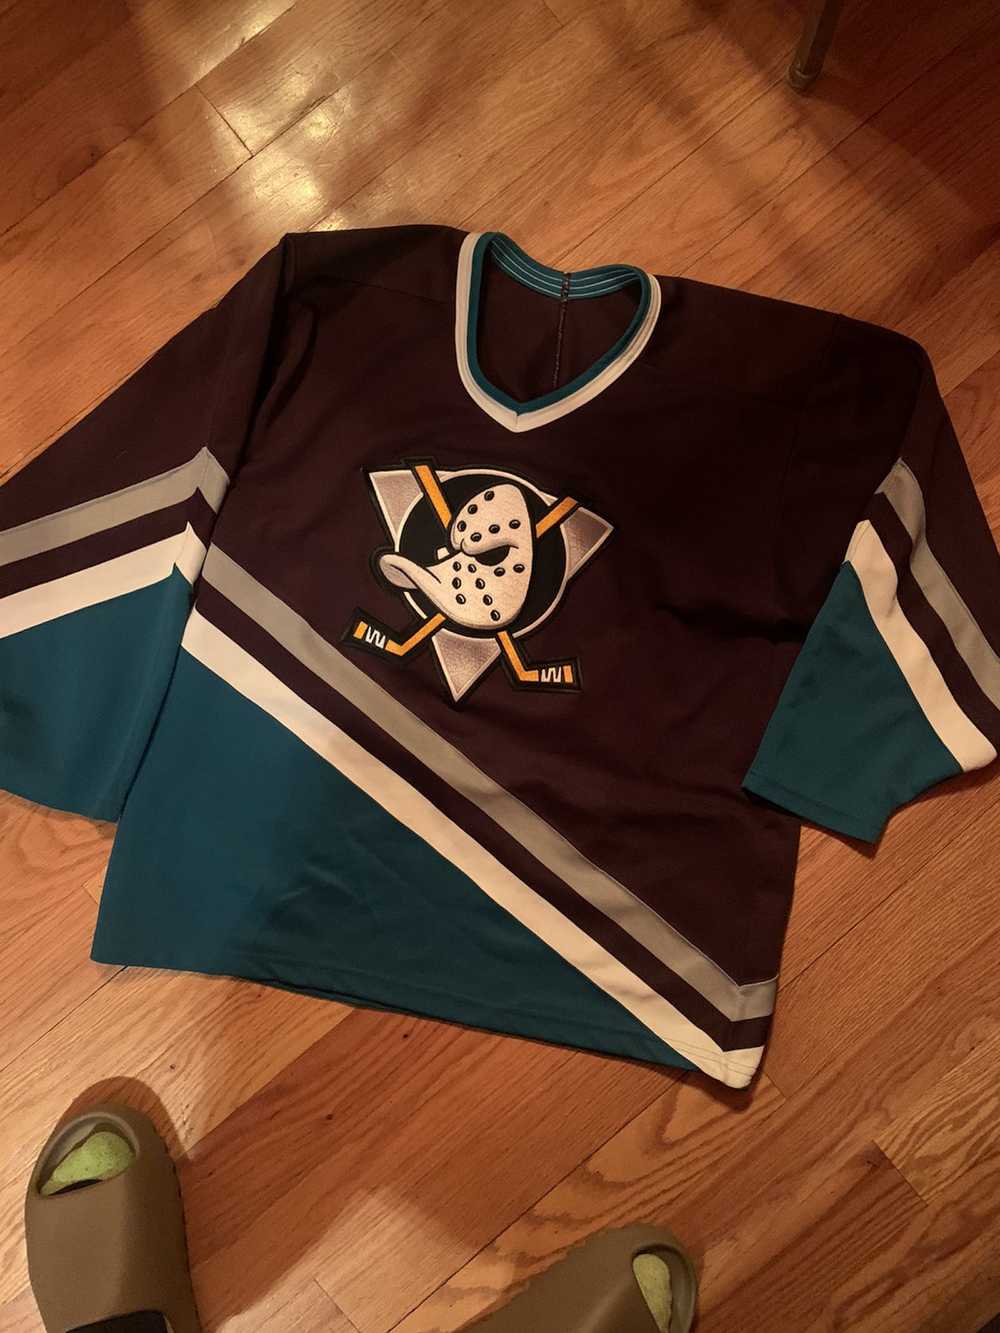 Today in Anaheim Ducks history on X: 3/16/2021: The #NHLducks debut their # ReverseRetro Breakout jerseys, modeled after their 1995 third jerseys  featuring mascot @WildWingANA bursting out from an ice surface.   /